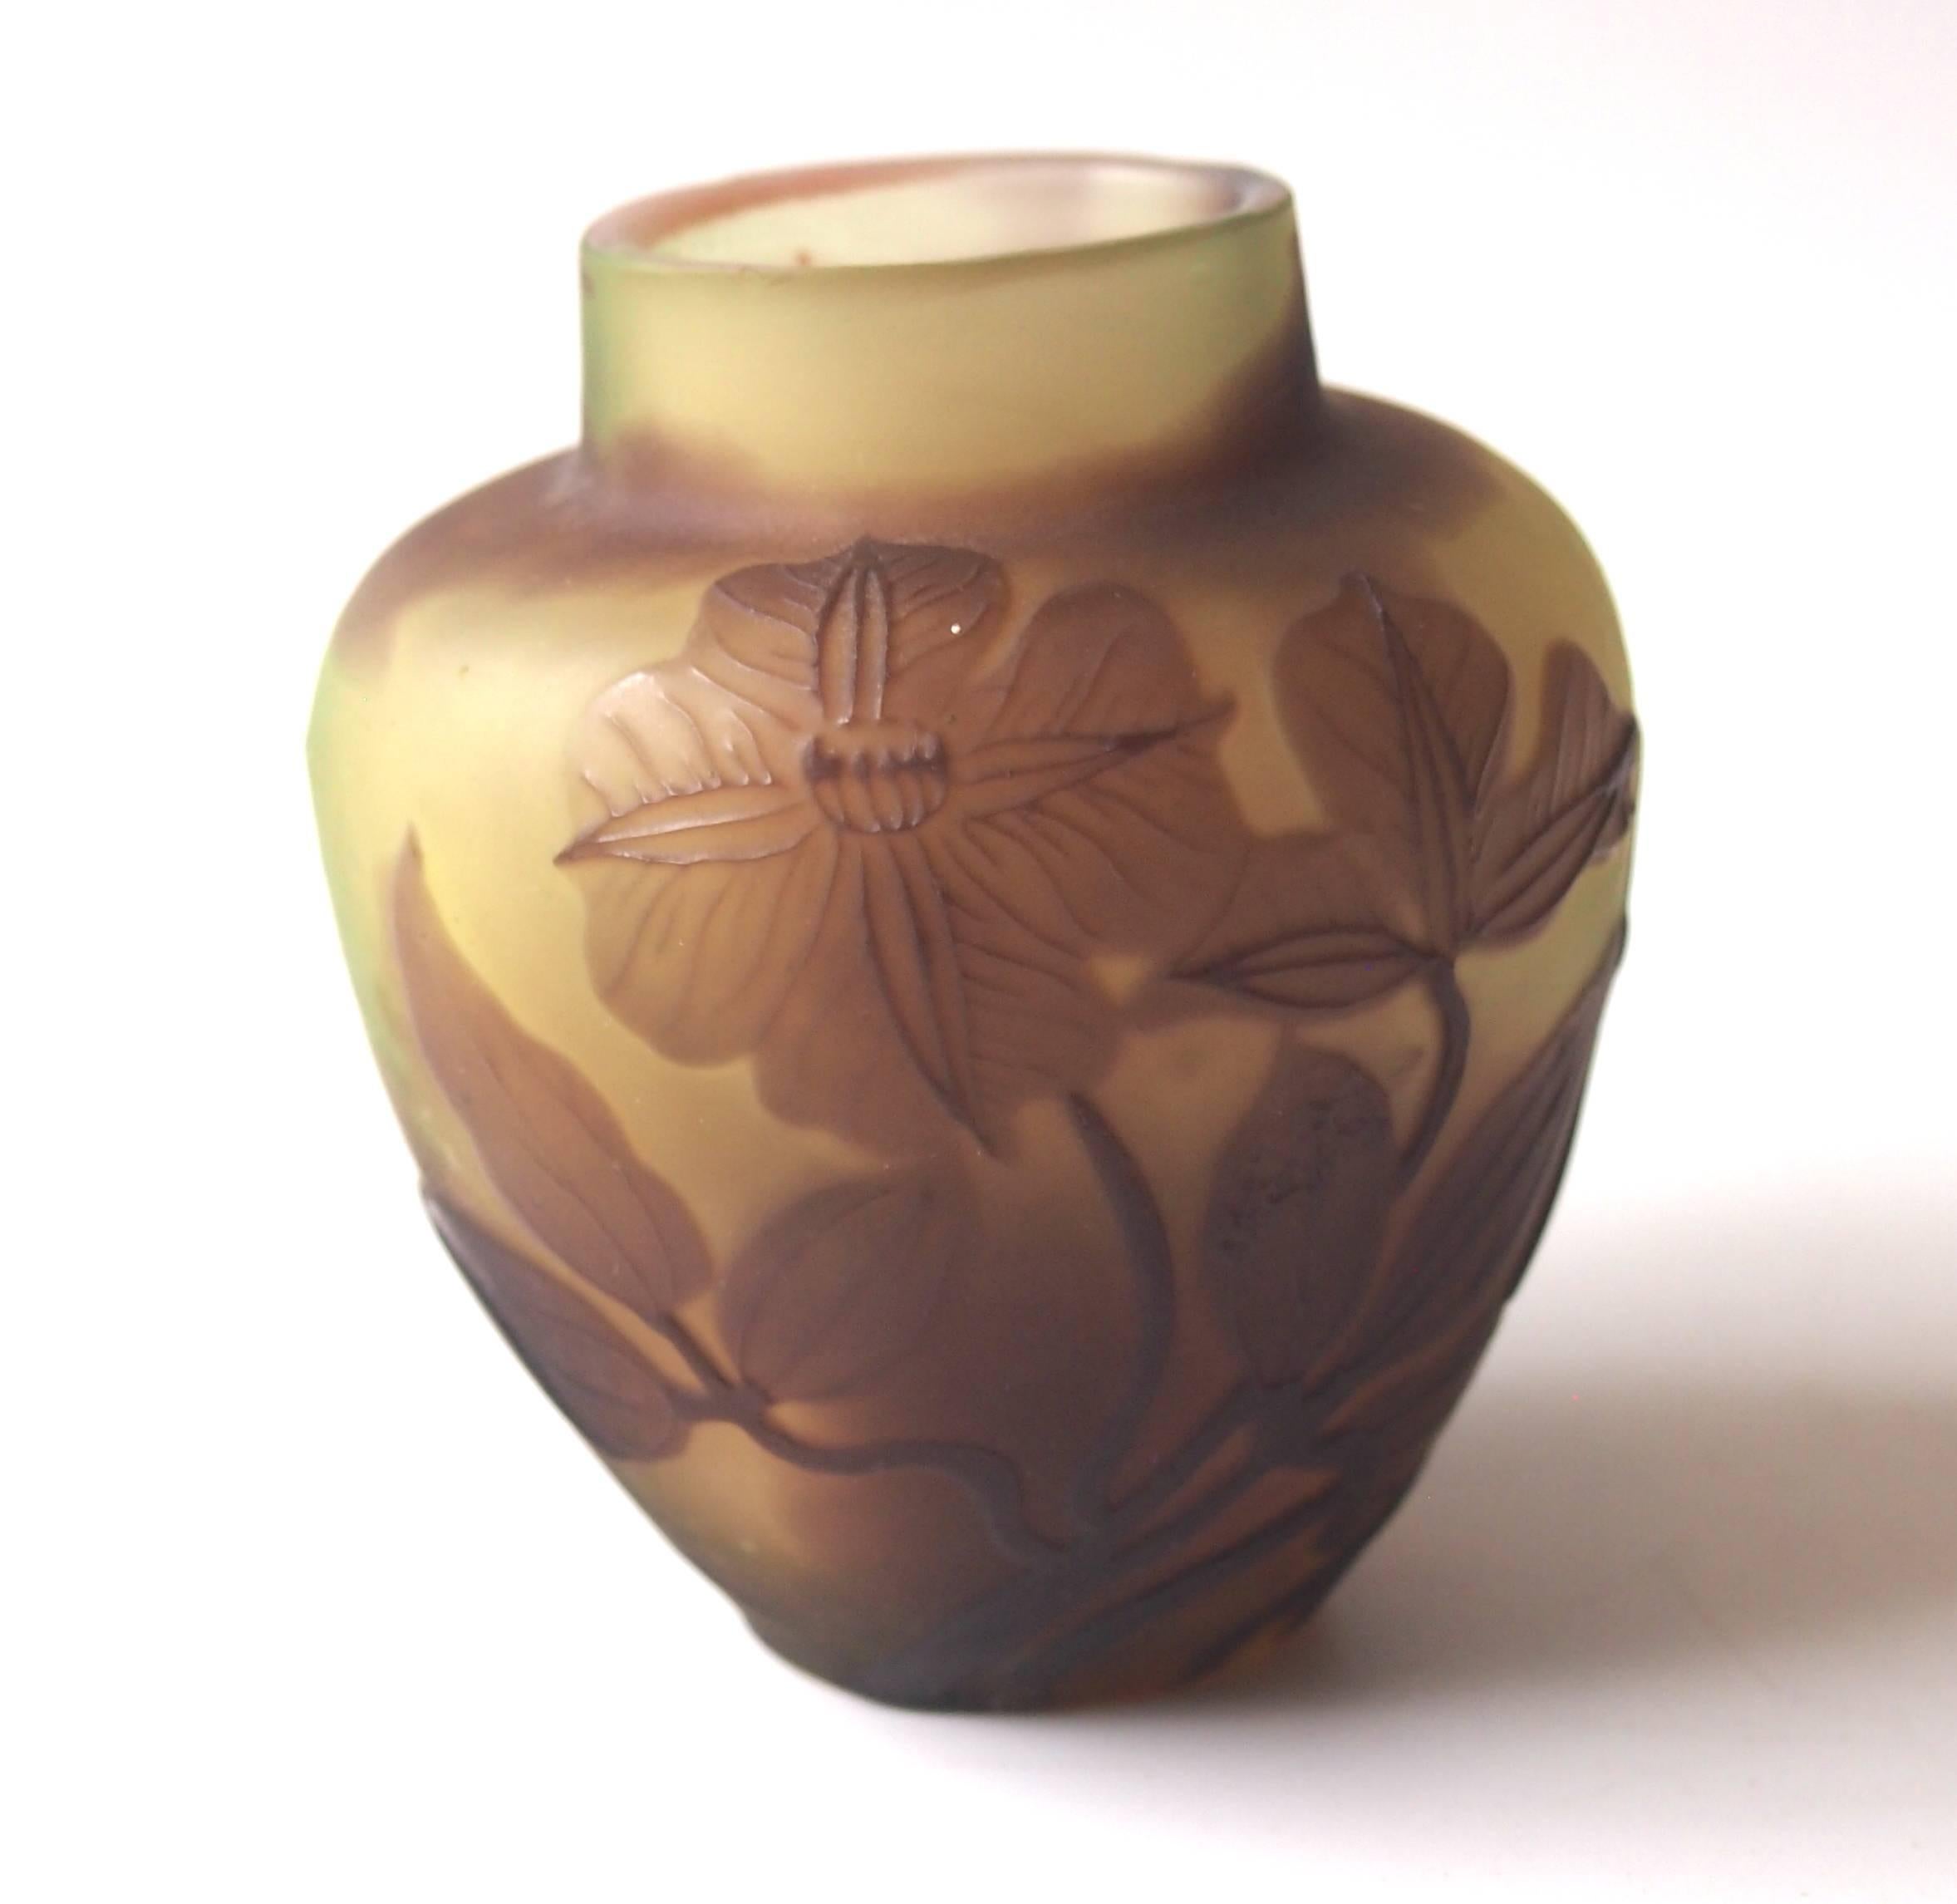 Superb Art Nouveau Emile Galle cameo miniature vase, in purple over greeny yellow depicting stylised blooming cyclamen, signed in cameo. All Emile Galle miniature cameo vases are rare but this is a particularly rare.